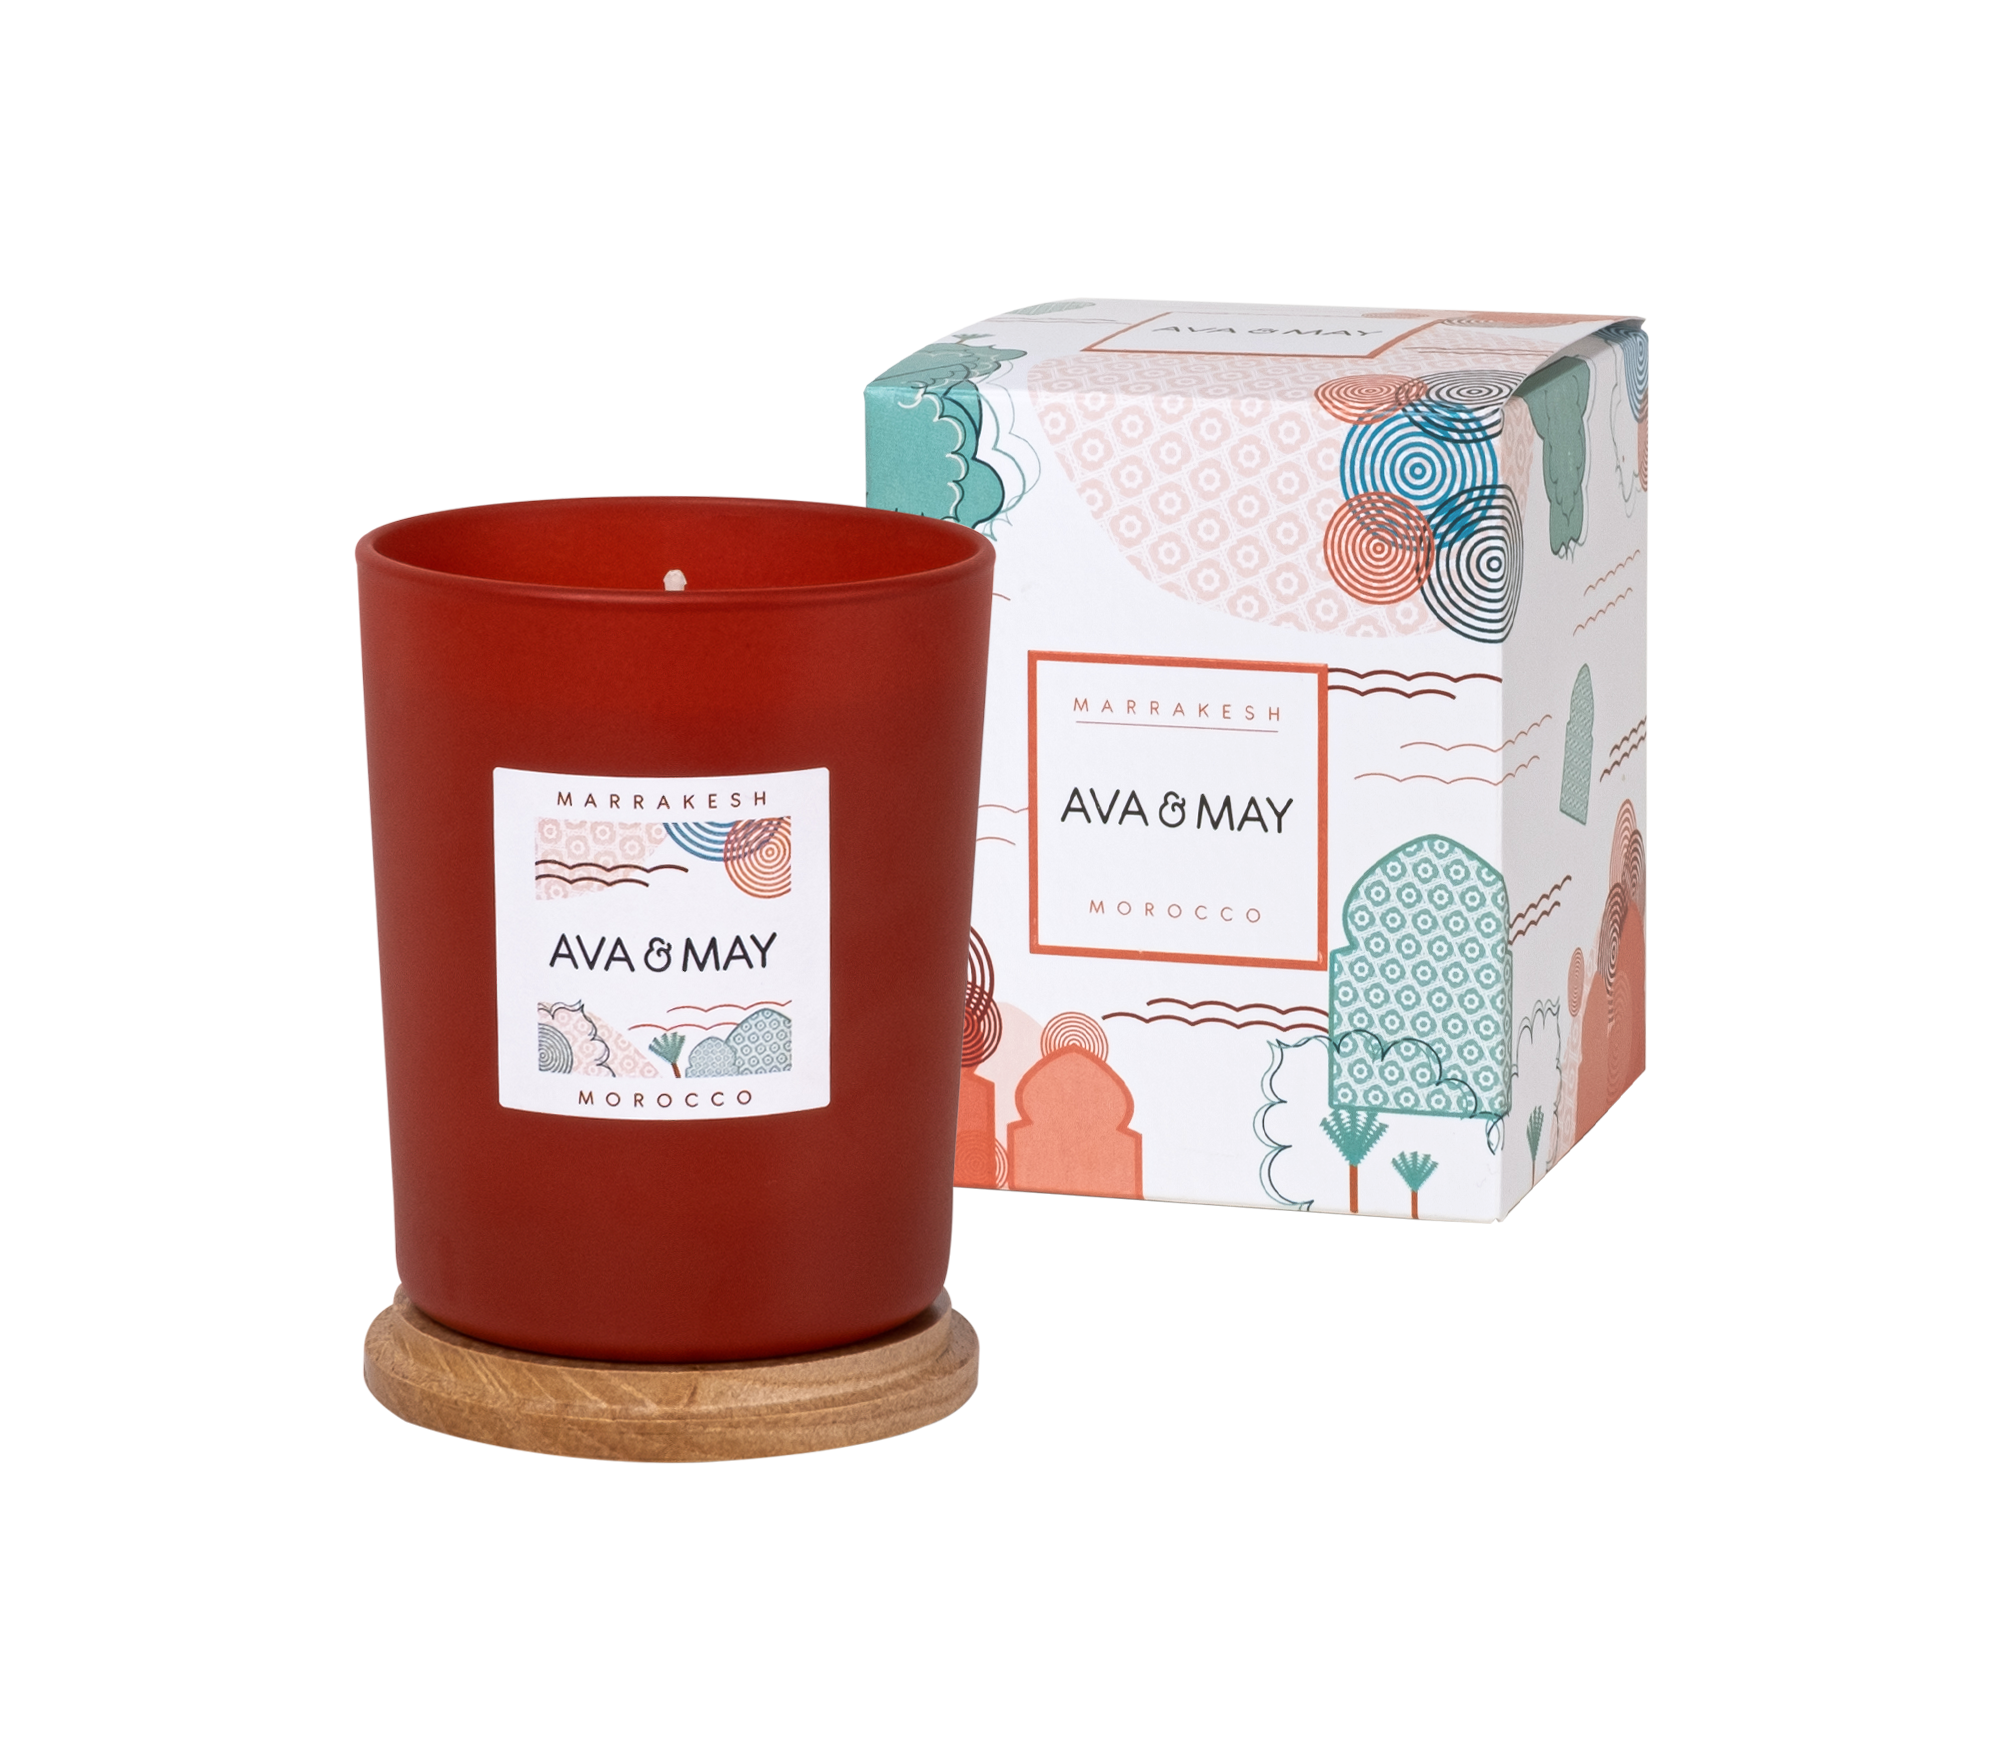 http://www.ava-may.it/cdn/shop/products/AM_P_Marrakesh_Candle_Packaging_2000x1760_d8db1a1b-5de4-4340-93a8-65003dd73c71.png?v=1624119762